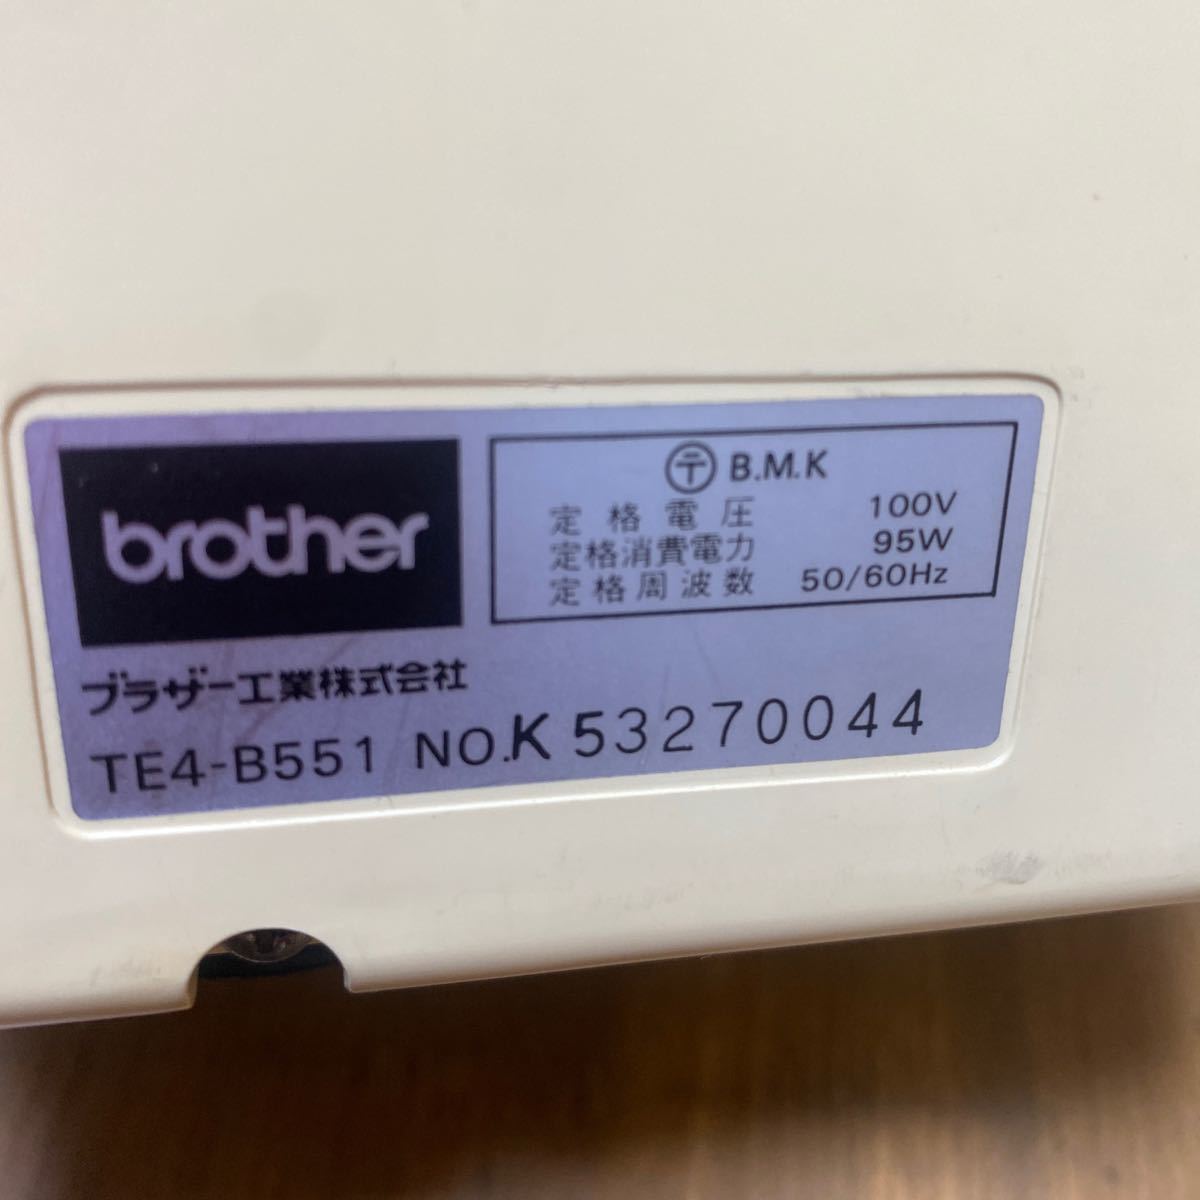 2402I9 brother Home Lock ブラザー ホームロック　ロックミシン　TE4-B551 _画像2